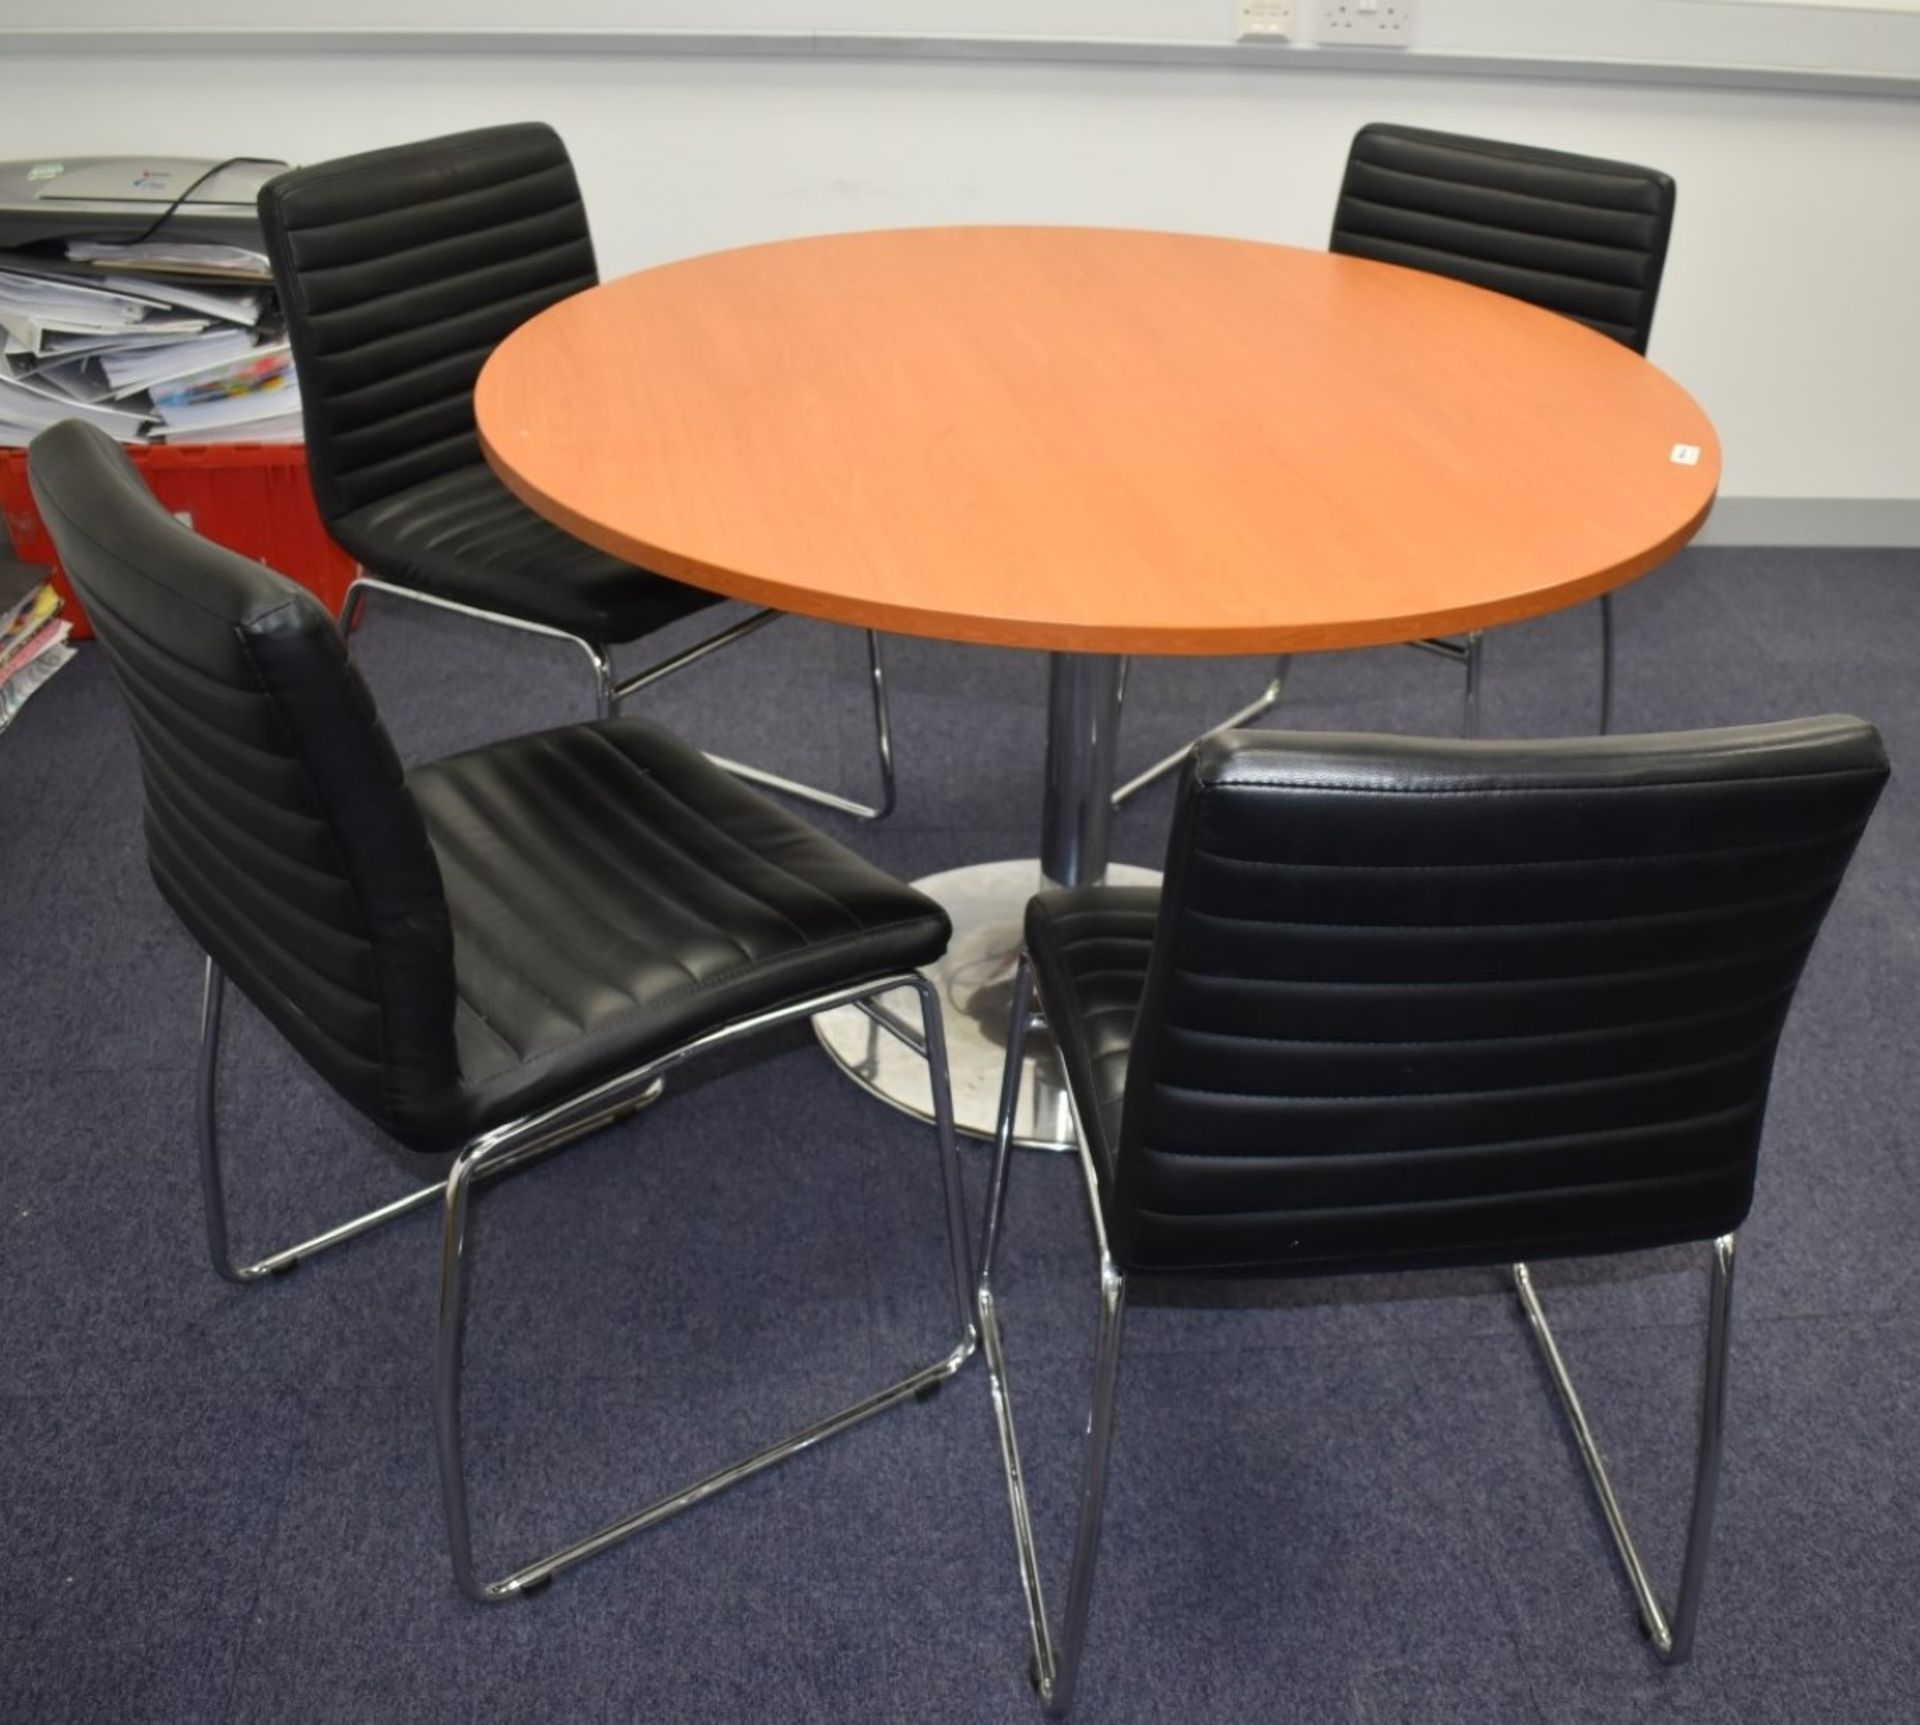 1 x Cherry Wood Office Meeting Table With Chrome Base and Four Black Faux Leather Office Chairs - Image 6 of 6